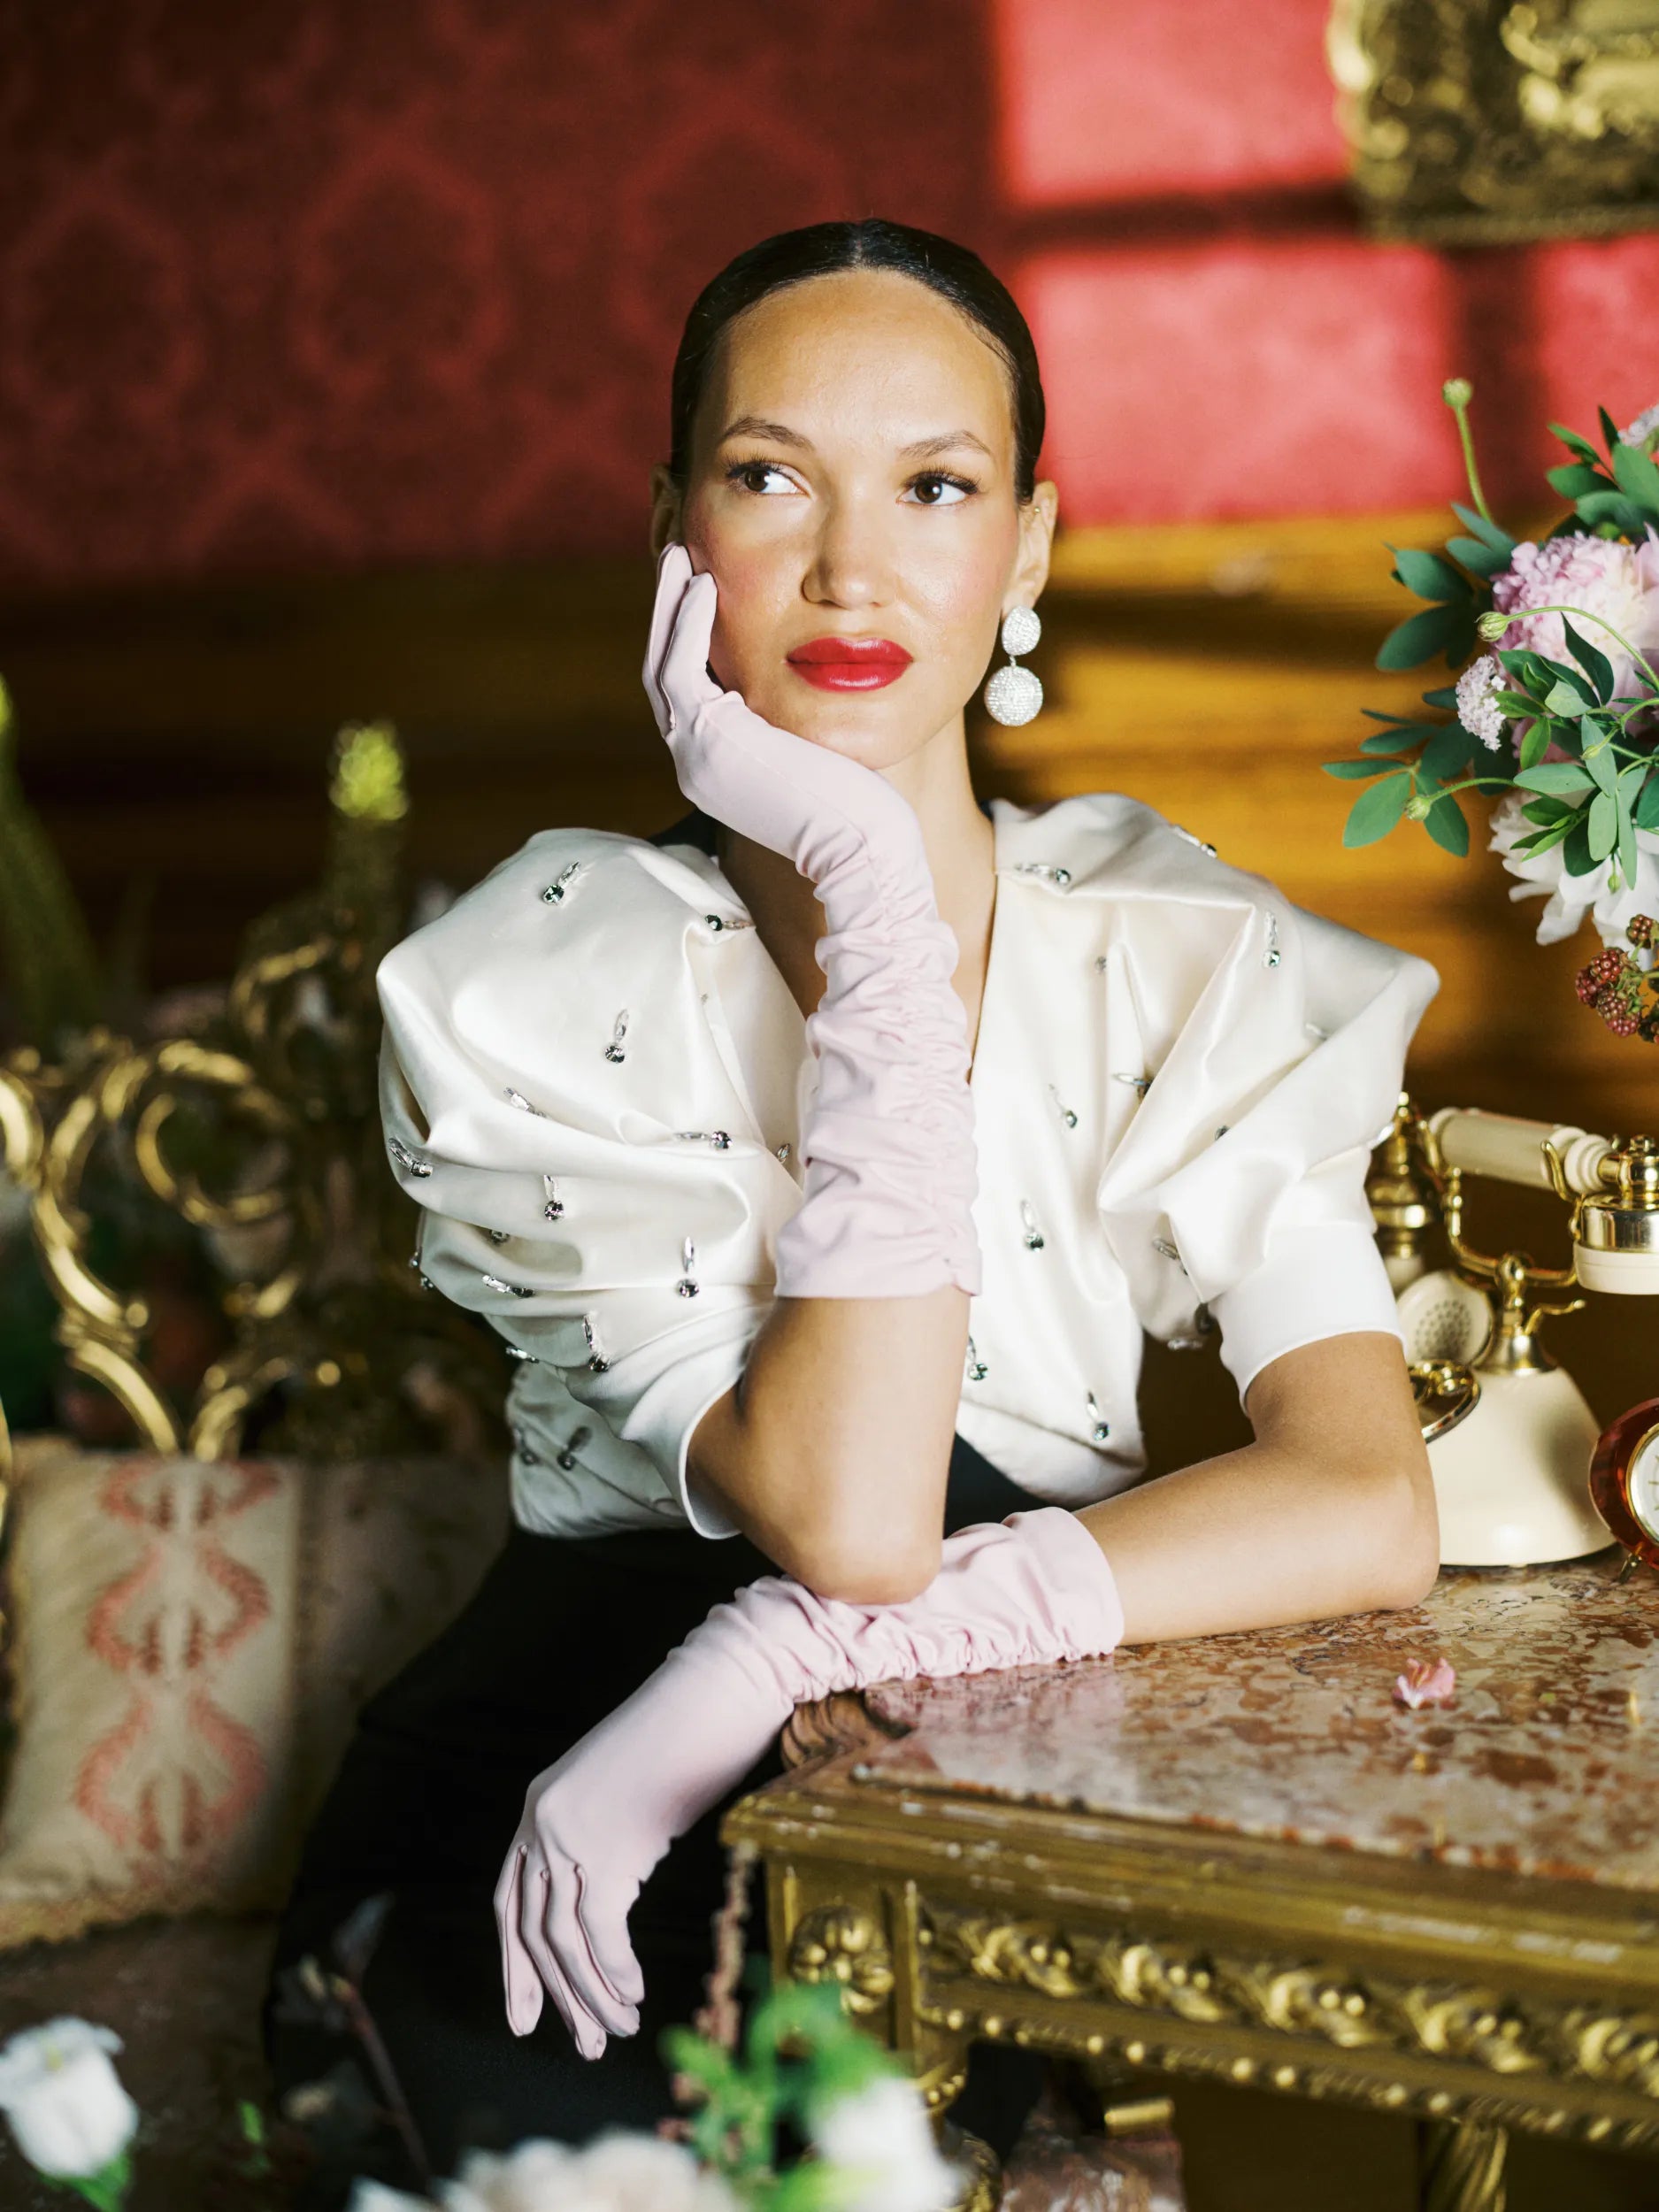 Woman sits, poised, wearing pink, elbow length gloves.